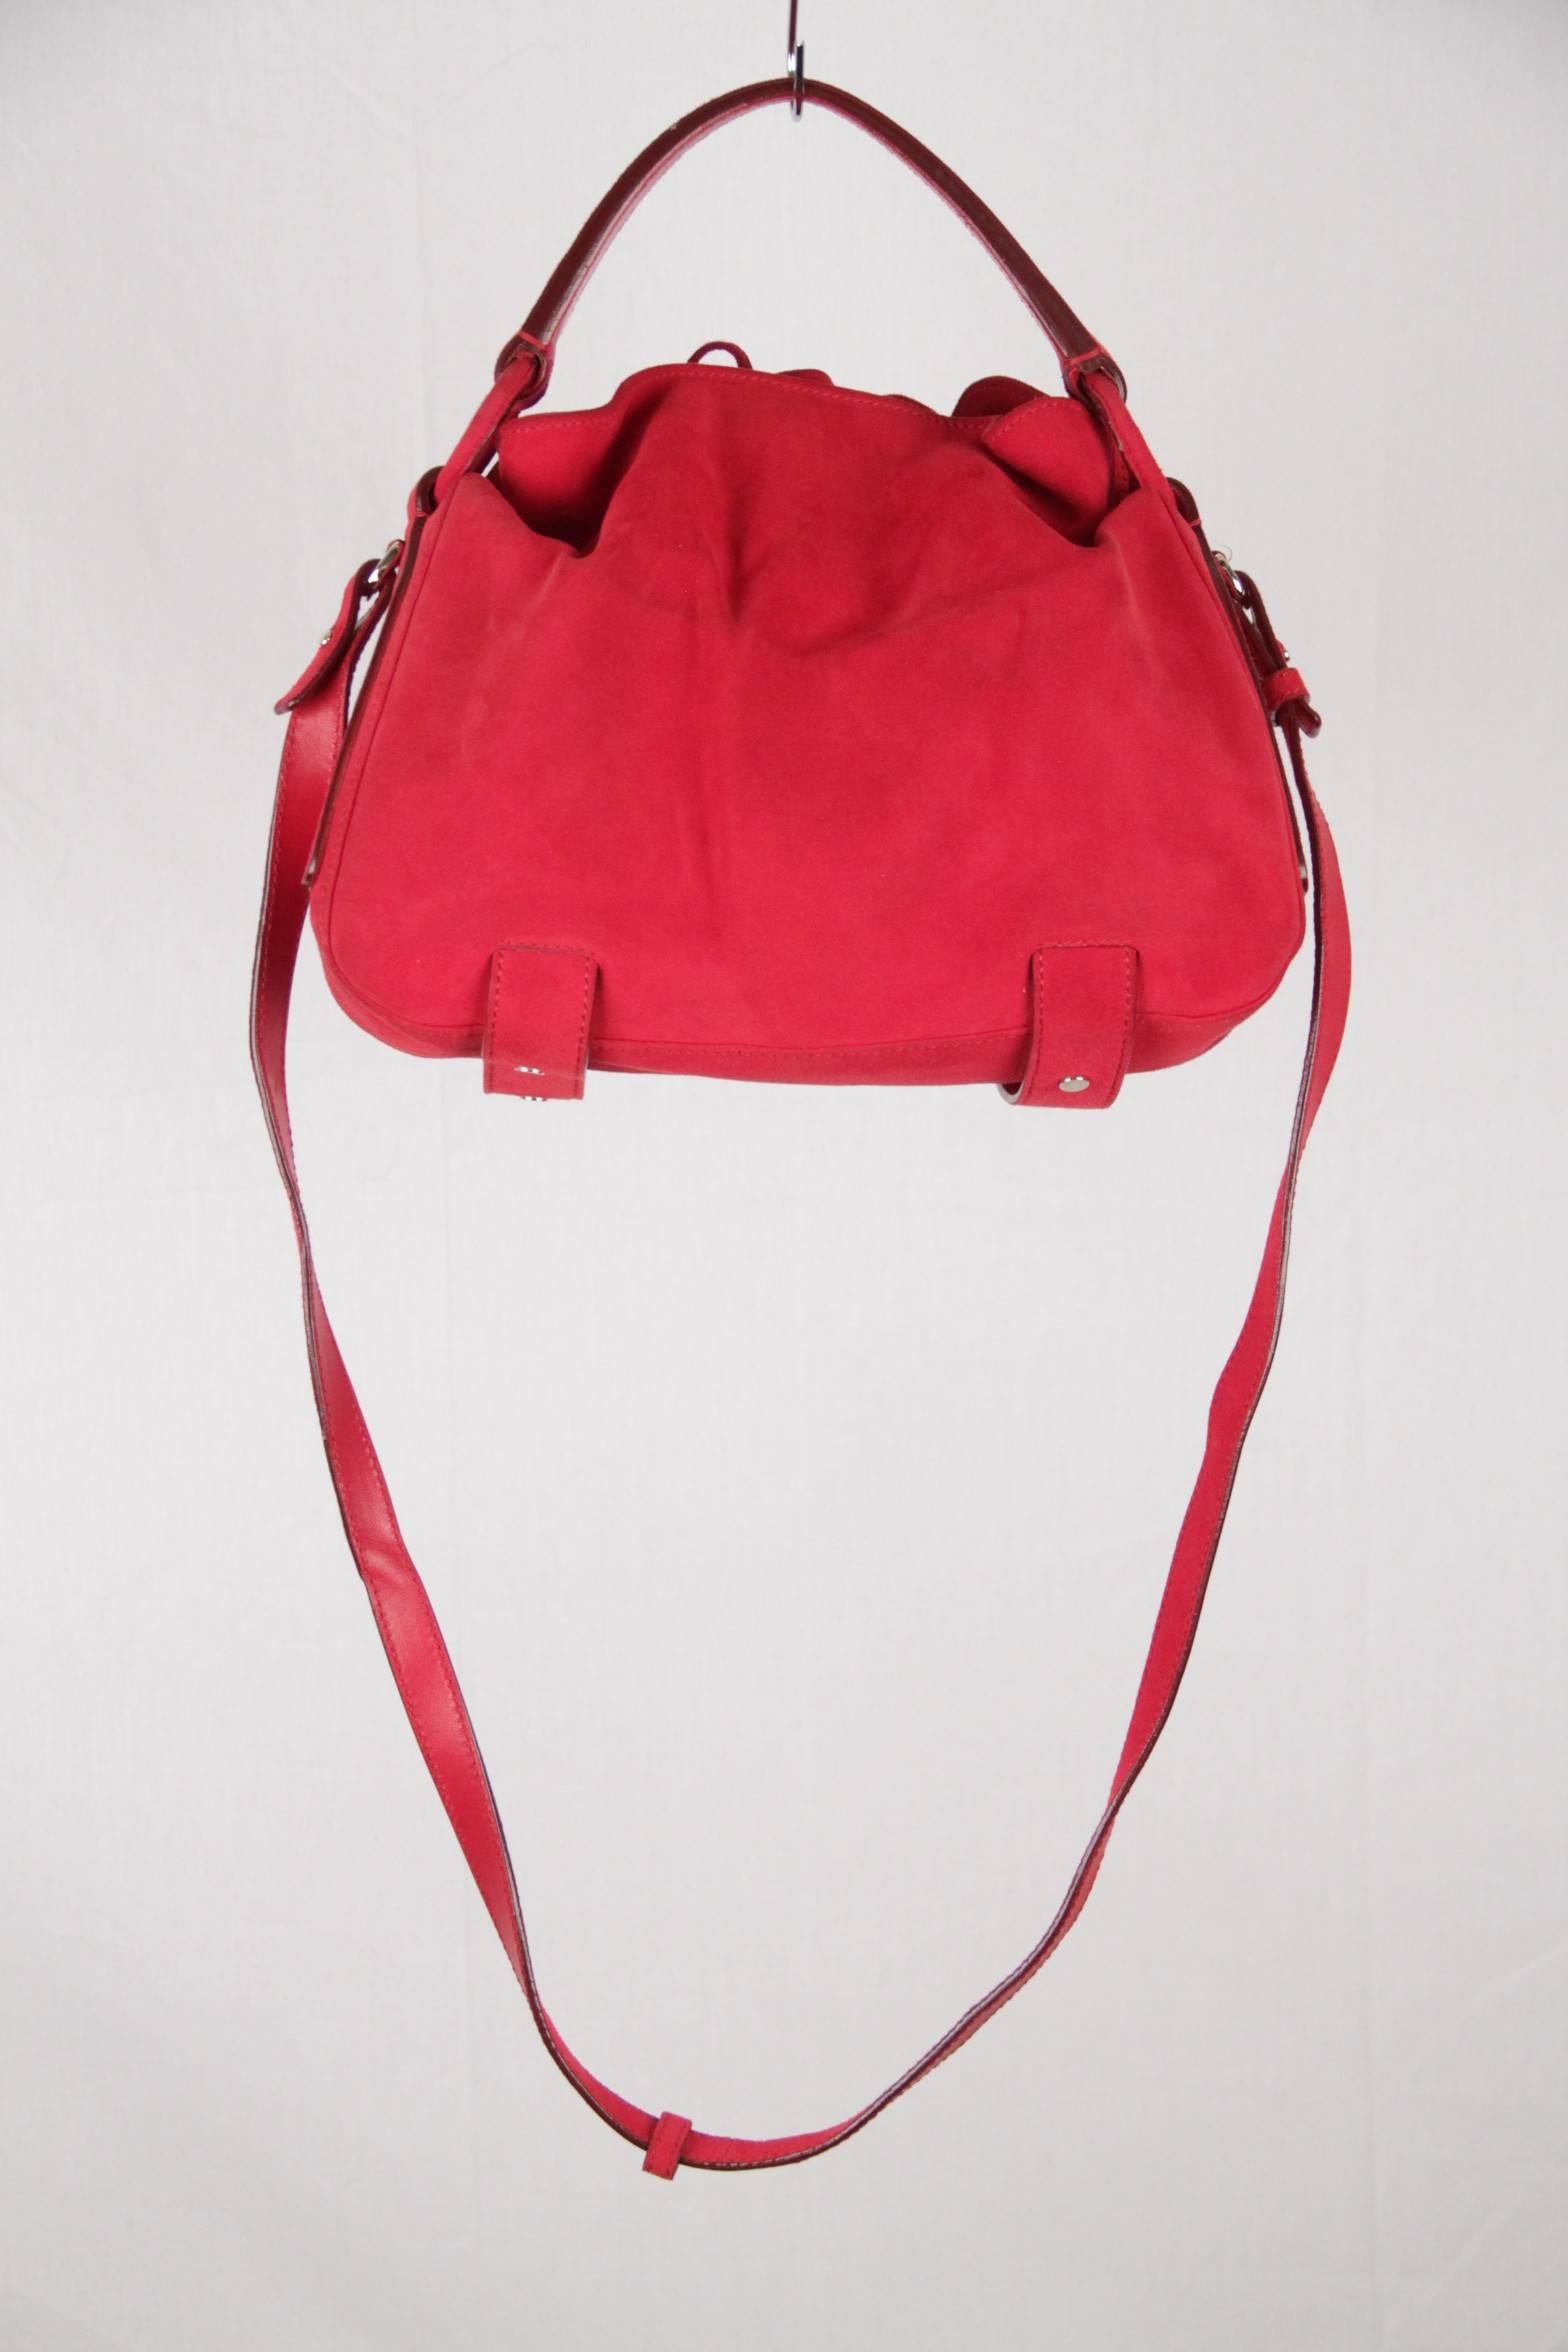 YVES SAINT LAURENT Red Suede SHOULDER BAG Tote HOBO w/ TASSELS In Good Condition In Rome, Rome